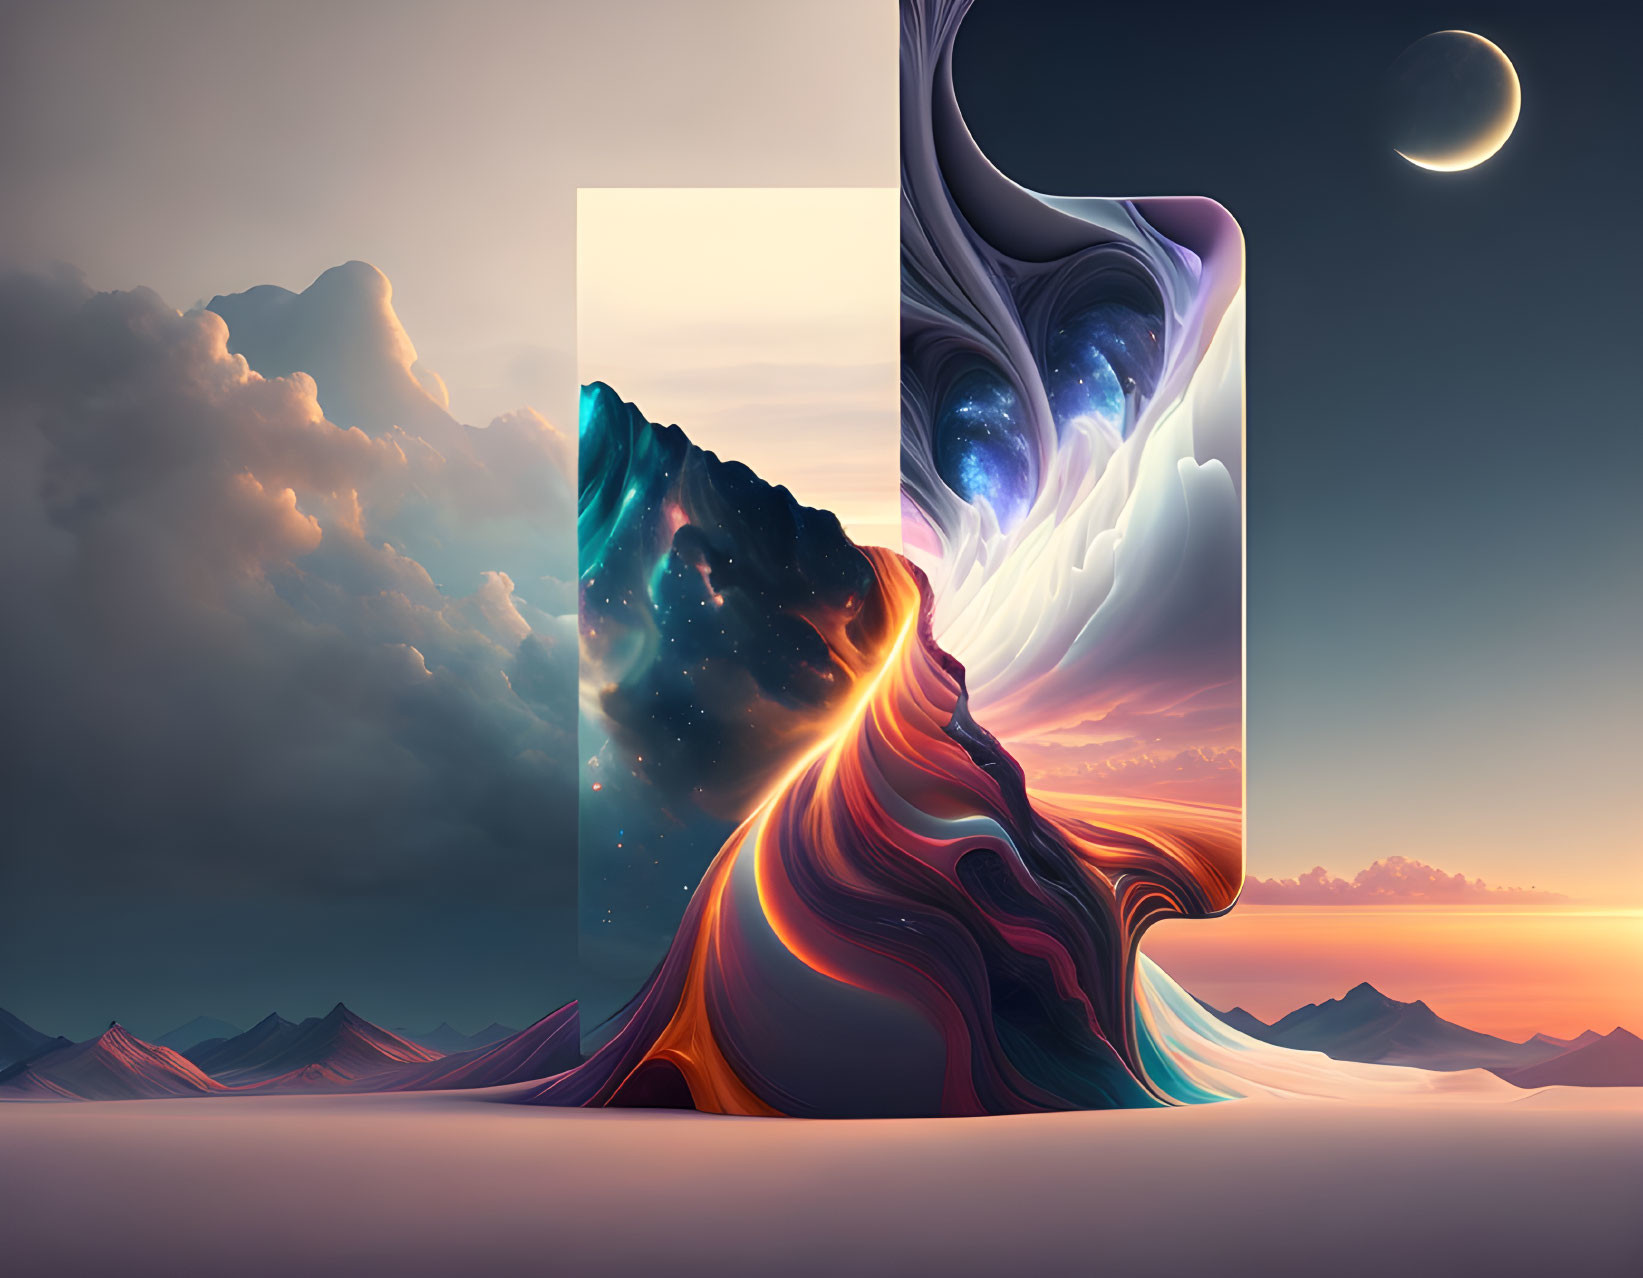 Fluid mountain-like structure in surreal twilight sky with crescent moon